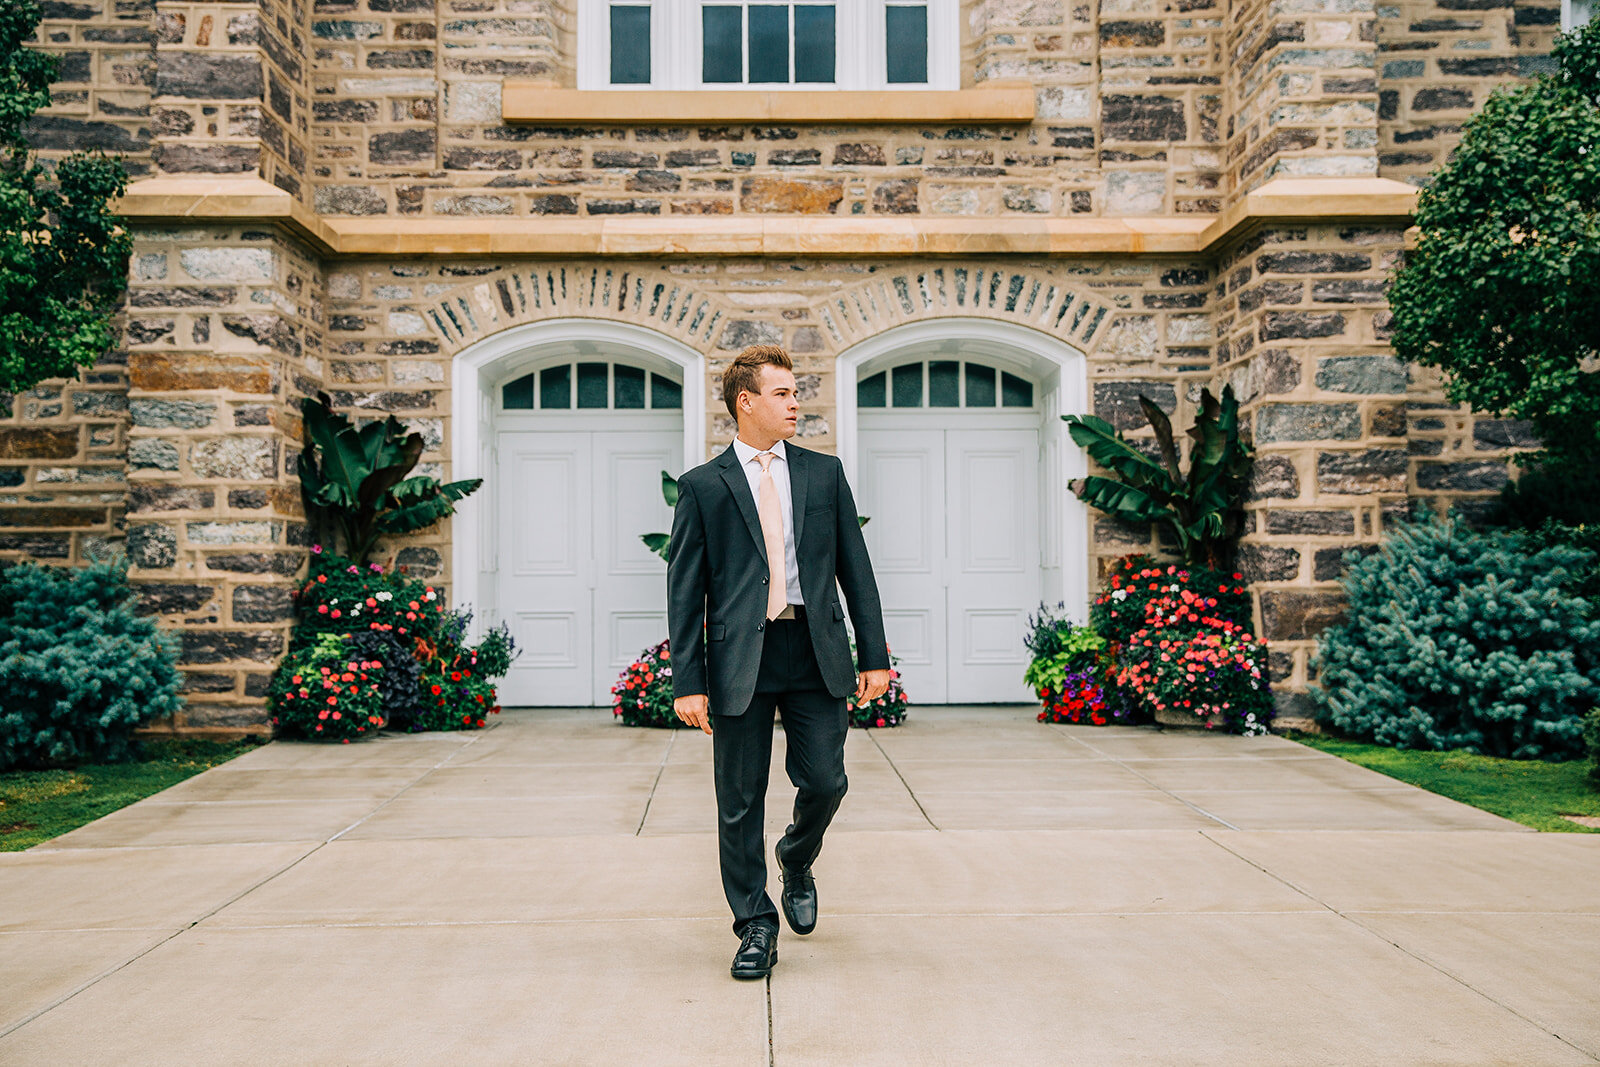  professional missionary pictures in cache valley young man black suit walking towards camera looking away pose ideas senior portraits missionary photo session at the logan utah temple #bellaalderphoto #missionary #missionaryportraits #missionpics #m